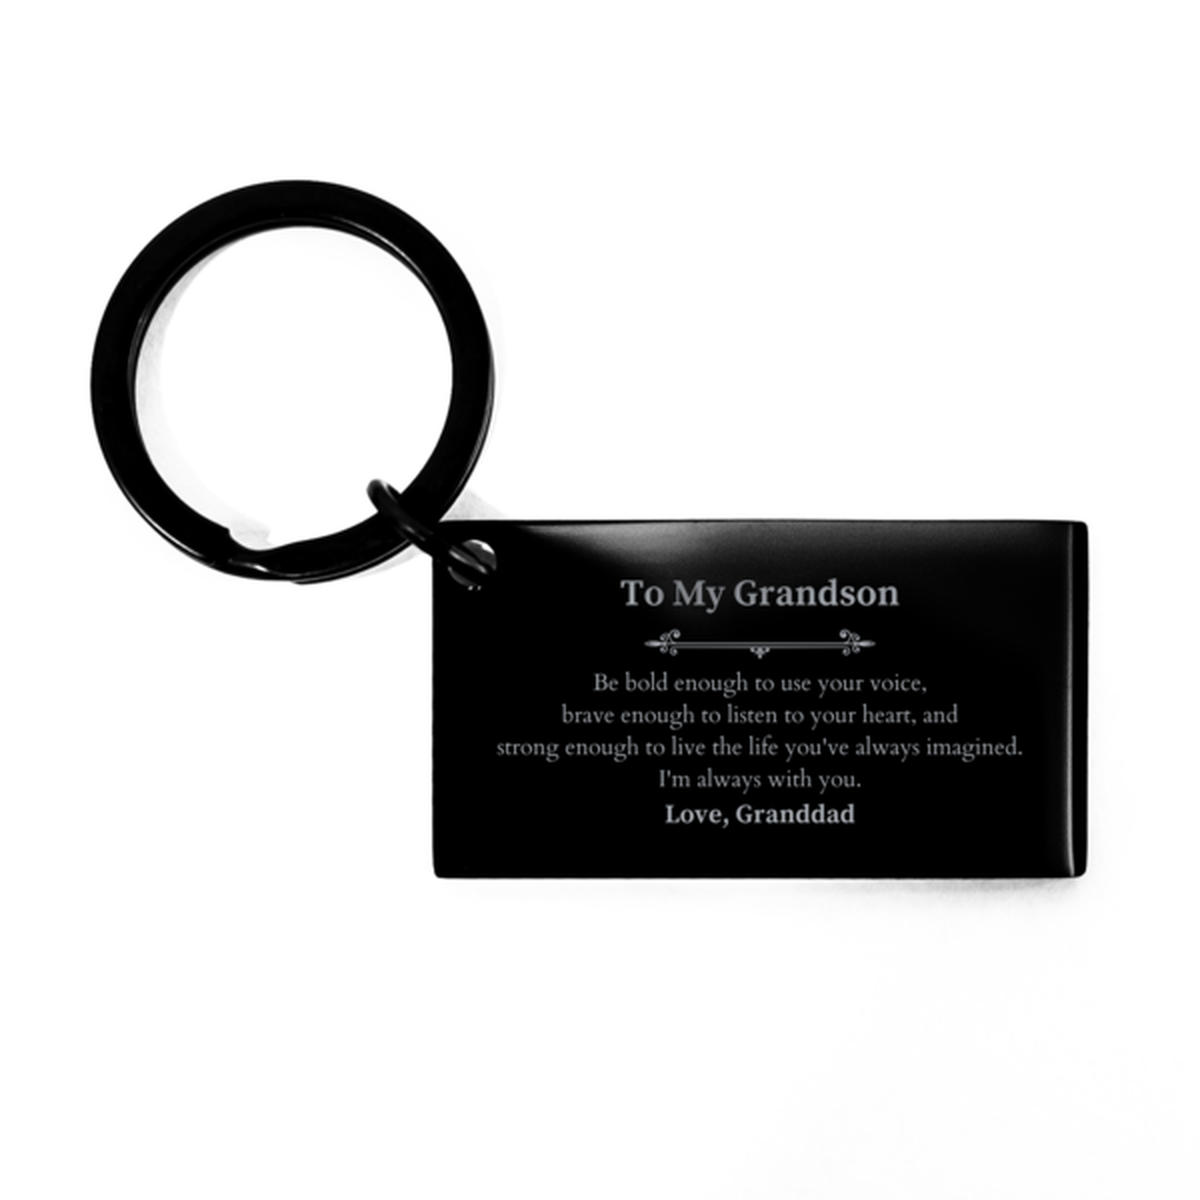 Keepsake Grandson Keychain Gift Idea Graduation Christmas Birthday Grandson from Granddad, Grandson Be bold enough to use your voice, brave enough to listen to your heart. Love, Granddad